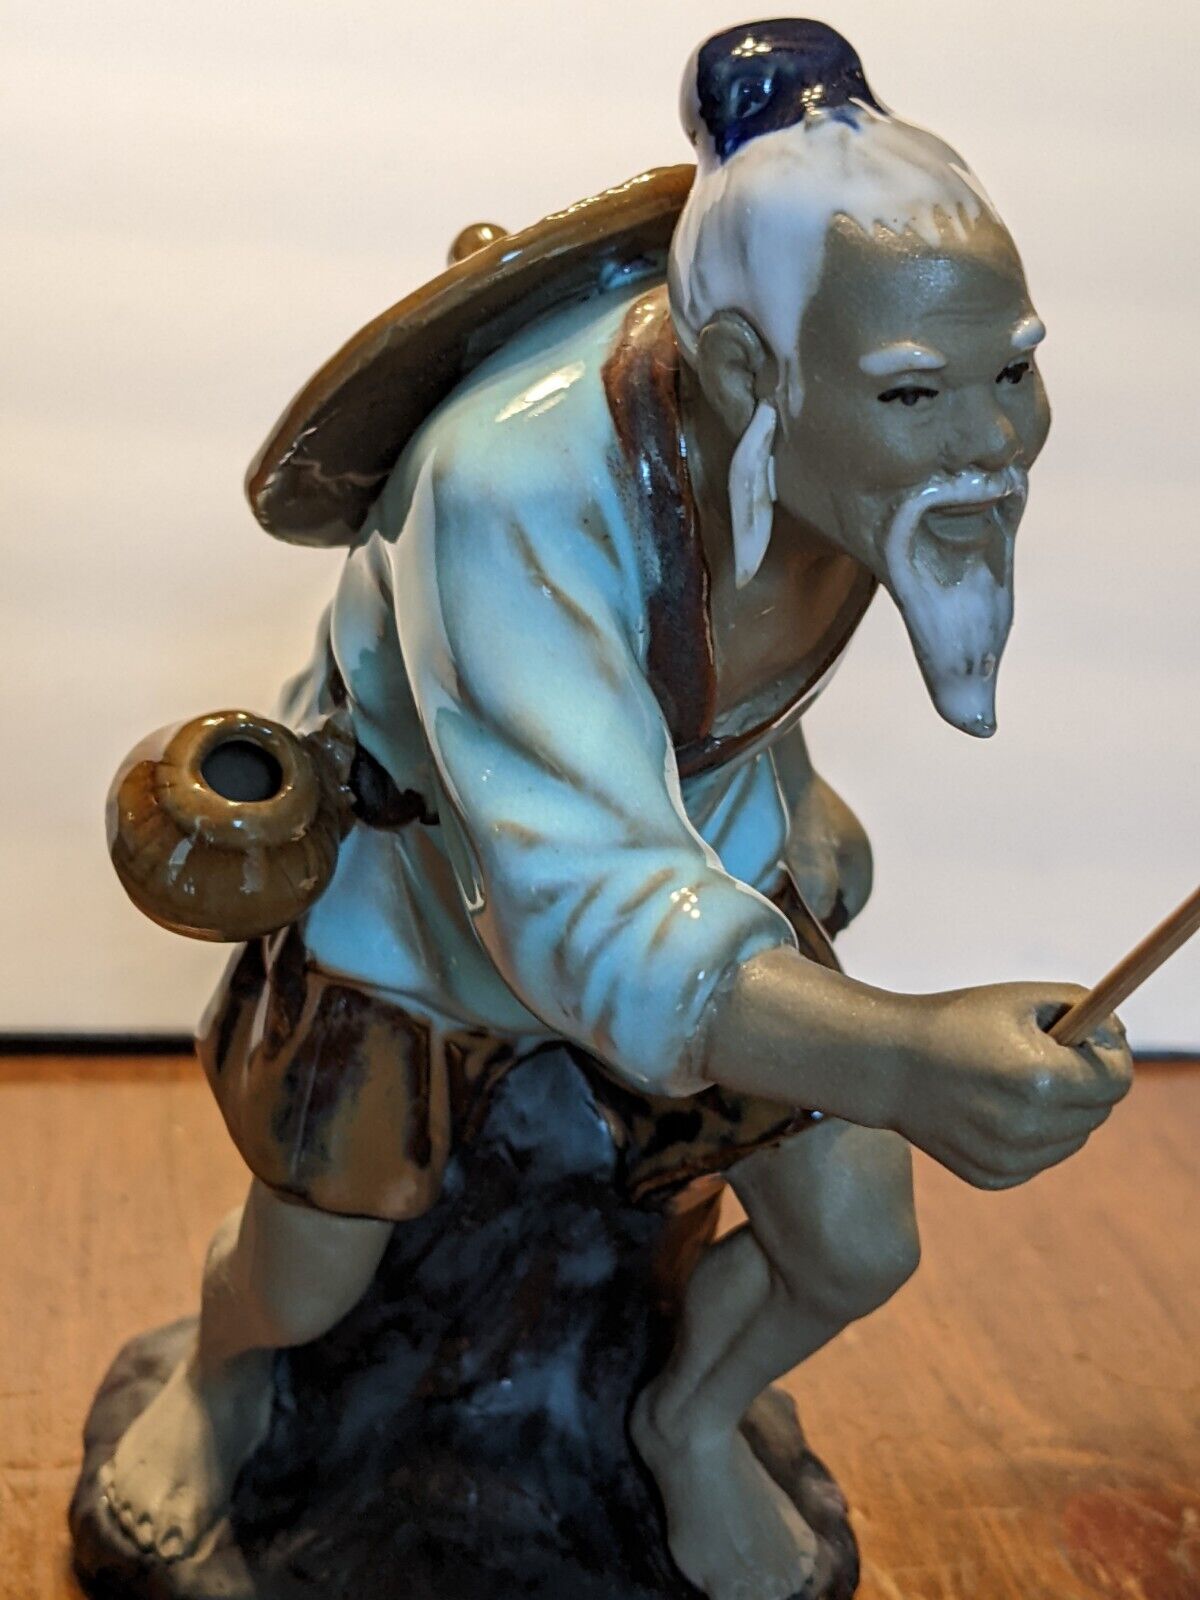 Vintage fishing man 100% New Crafted & Glazed.7 inches tall...never sold